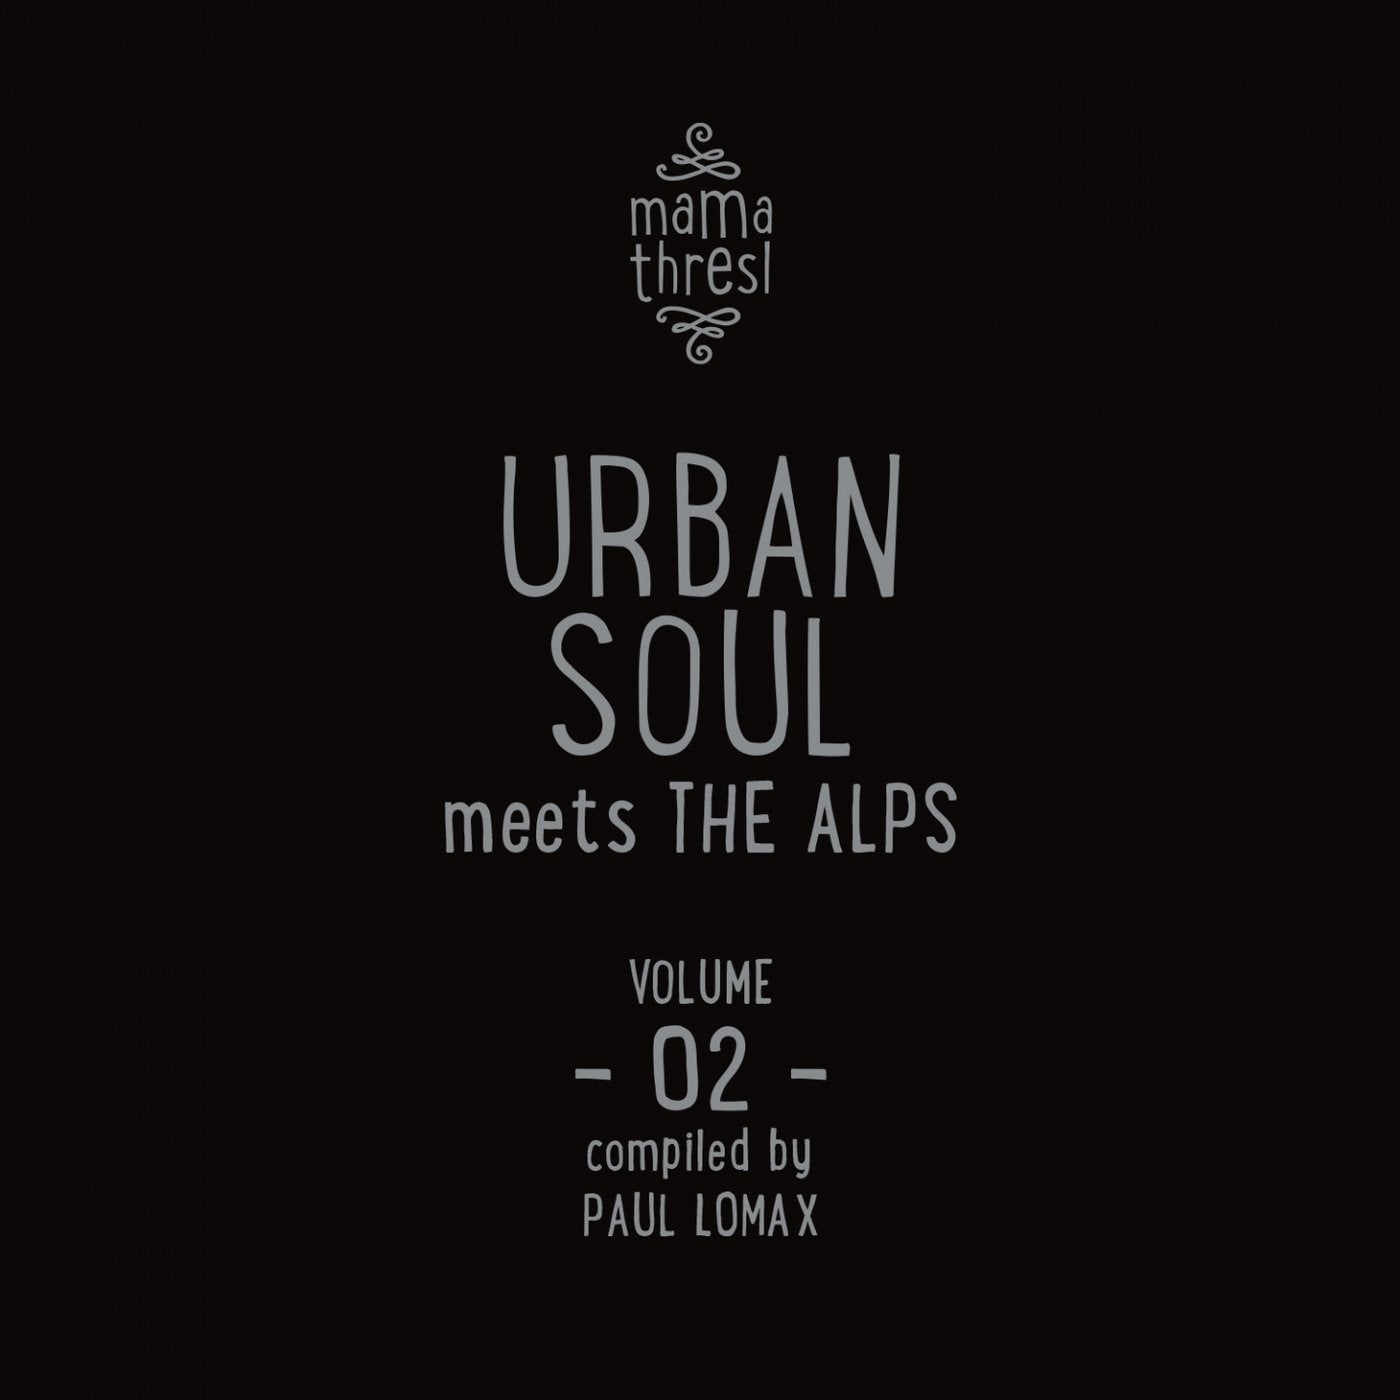 Urban Soul Meets the Alps / Mama Thresl, Vol. 2 (Compiled by Paul Lomax)